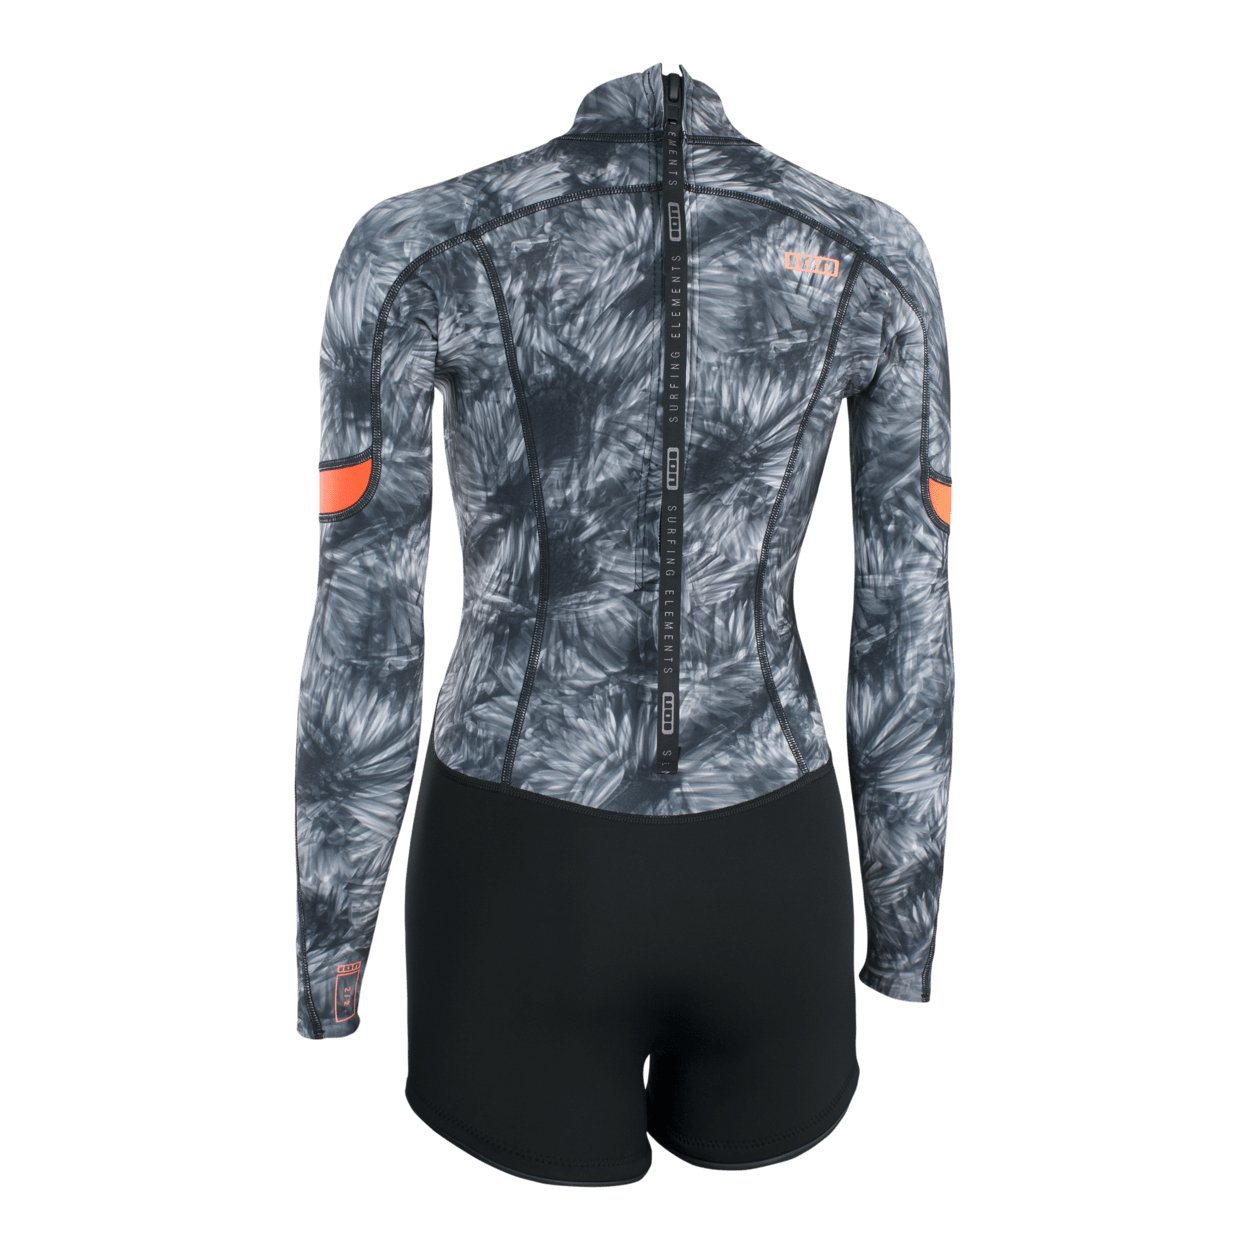 ION Amaze Shorty 2.0 LS Back Zip 2023 - Worthing Watersports - 9010583091112 - Wetsuits - ION Water